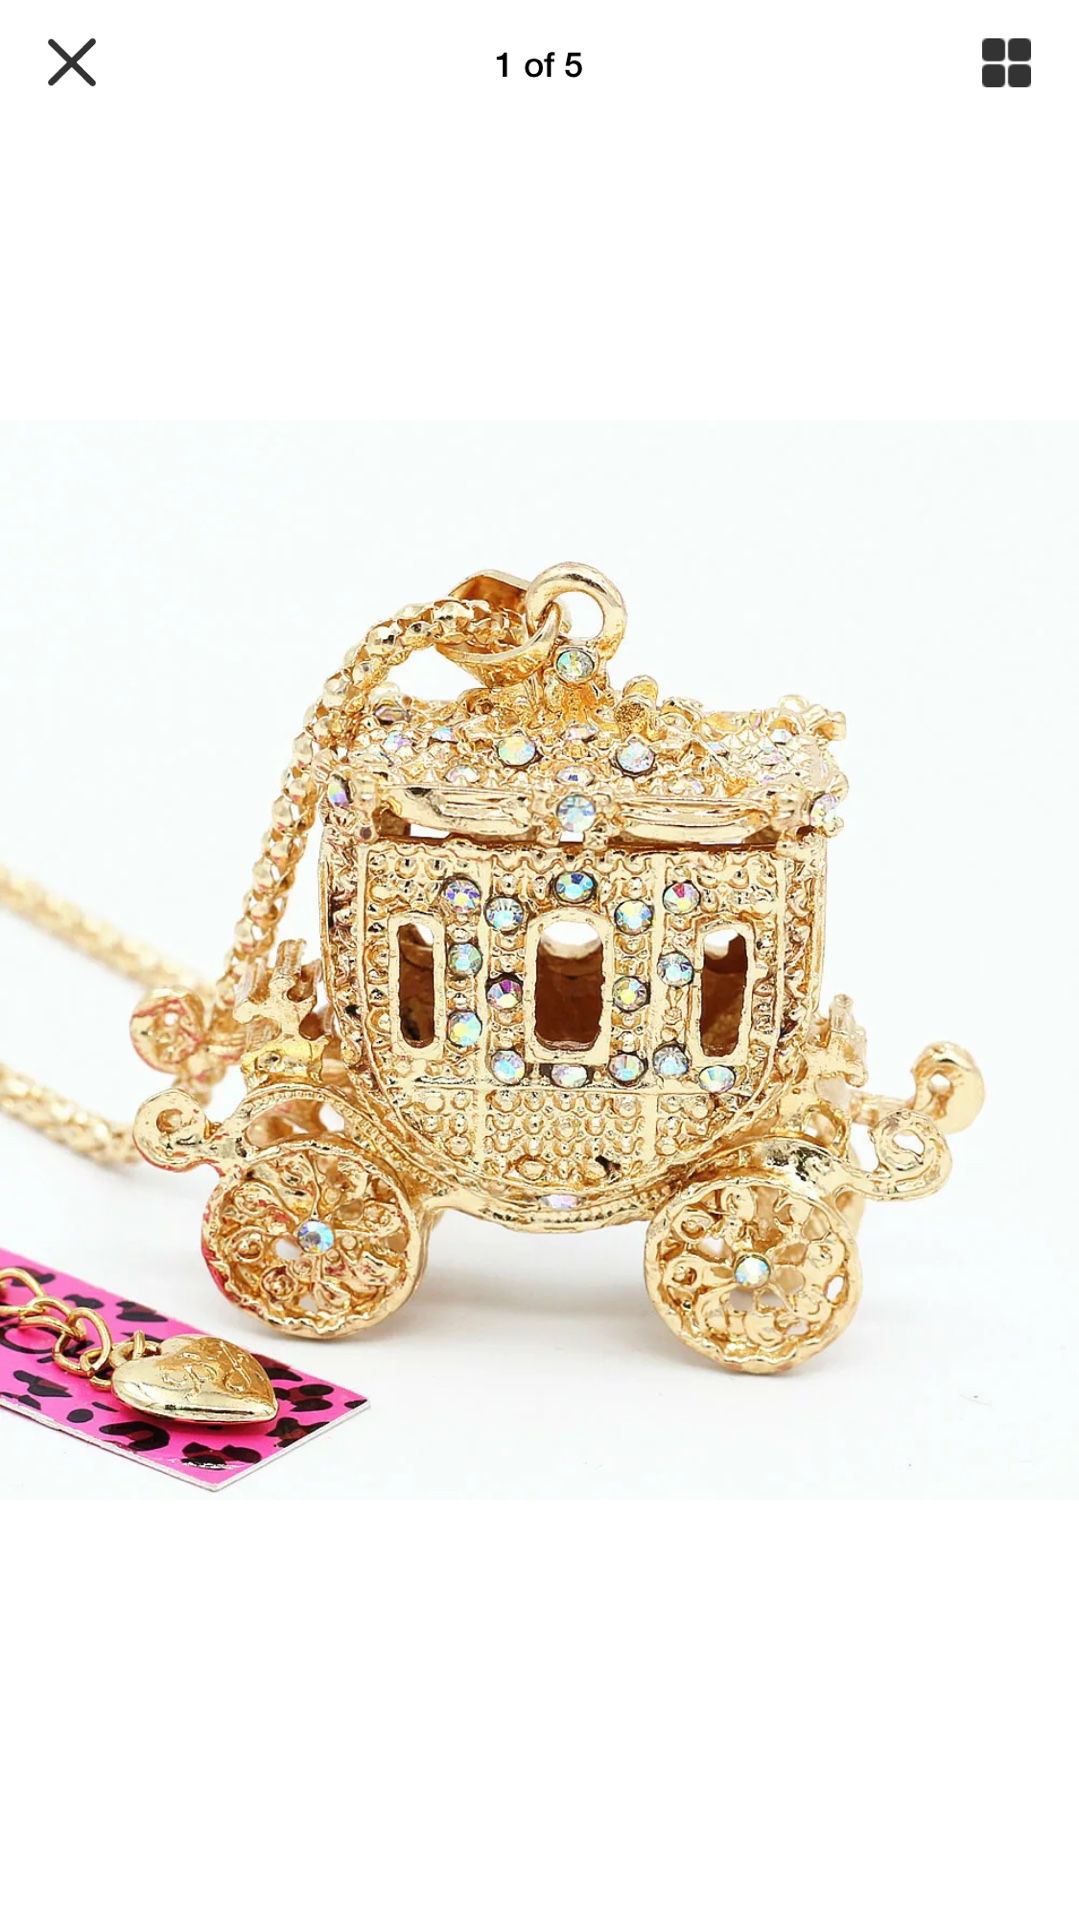 Betsey Johnson gold 3 d fairy tale carriage with rhinestones on4 wheels 3 “ high on gold chain